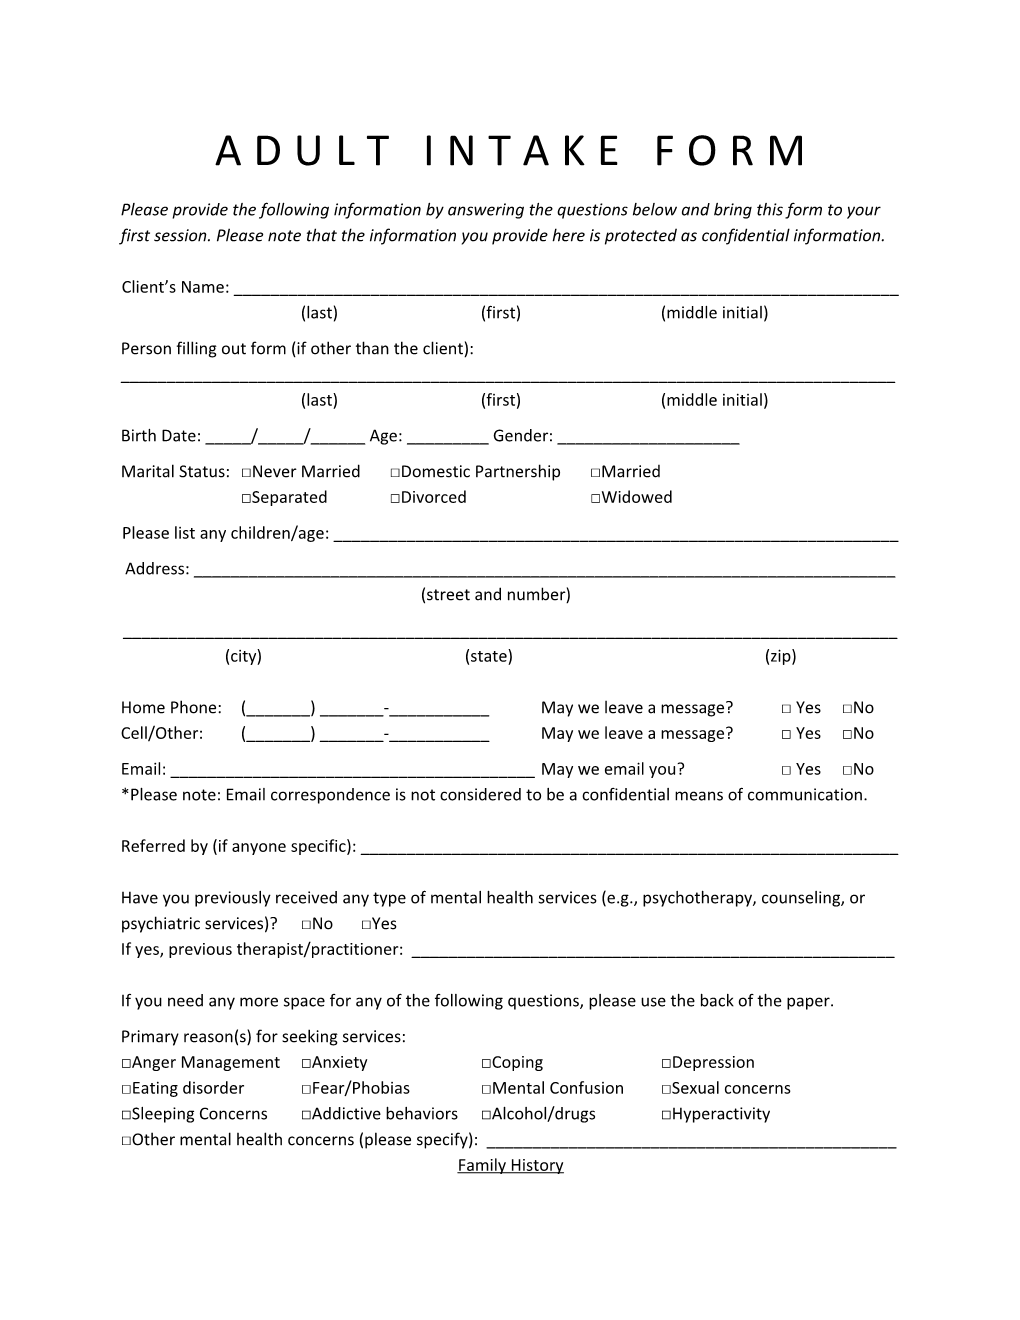 Person Filling out Form (If Other Than the Client)